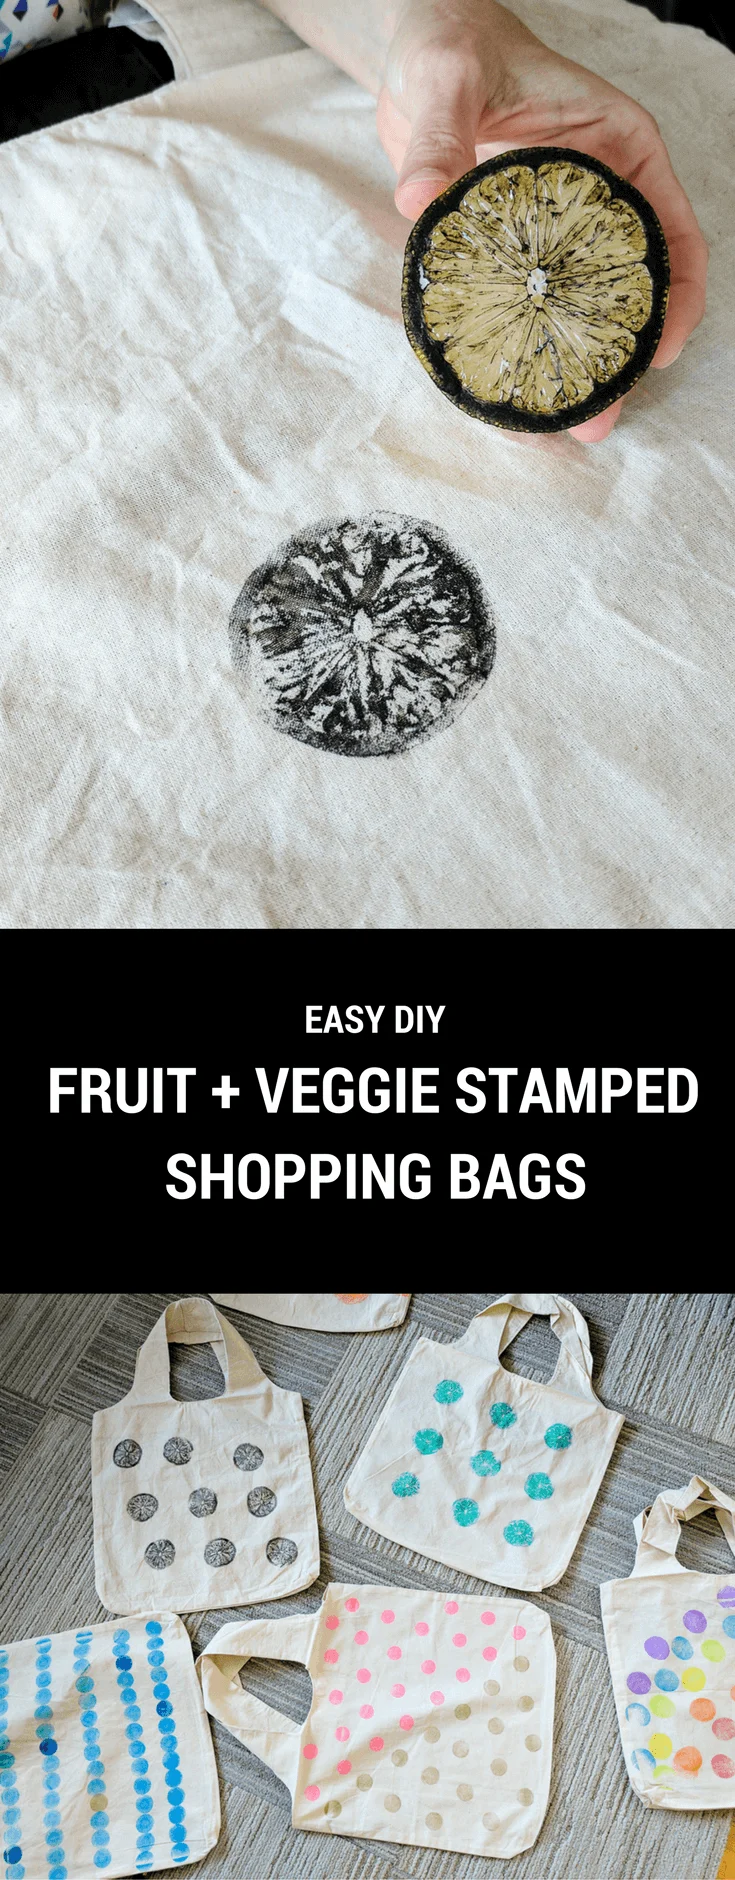 Fruit and veggie stamping: Make easy DIY reusable cotton shopping bags stamped with lemons, potatoes, onions, carrots and more vegetables